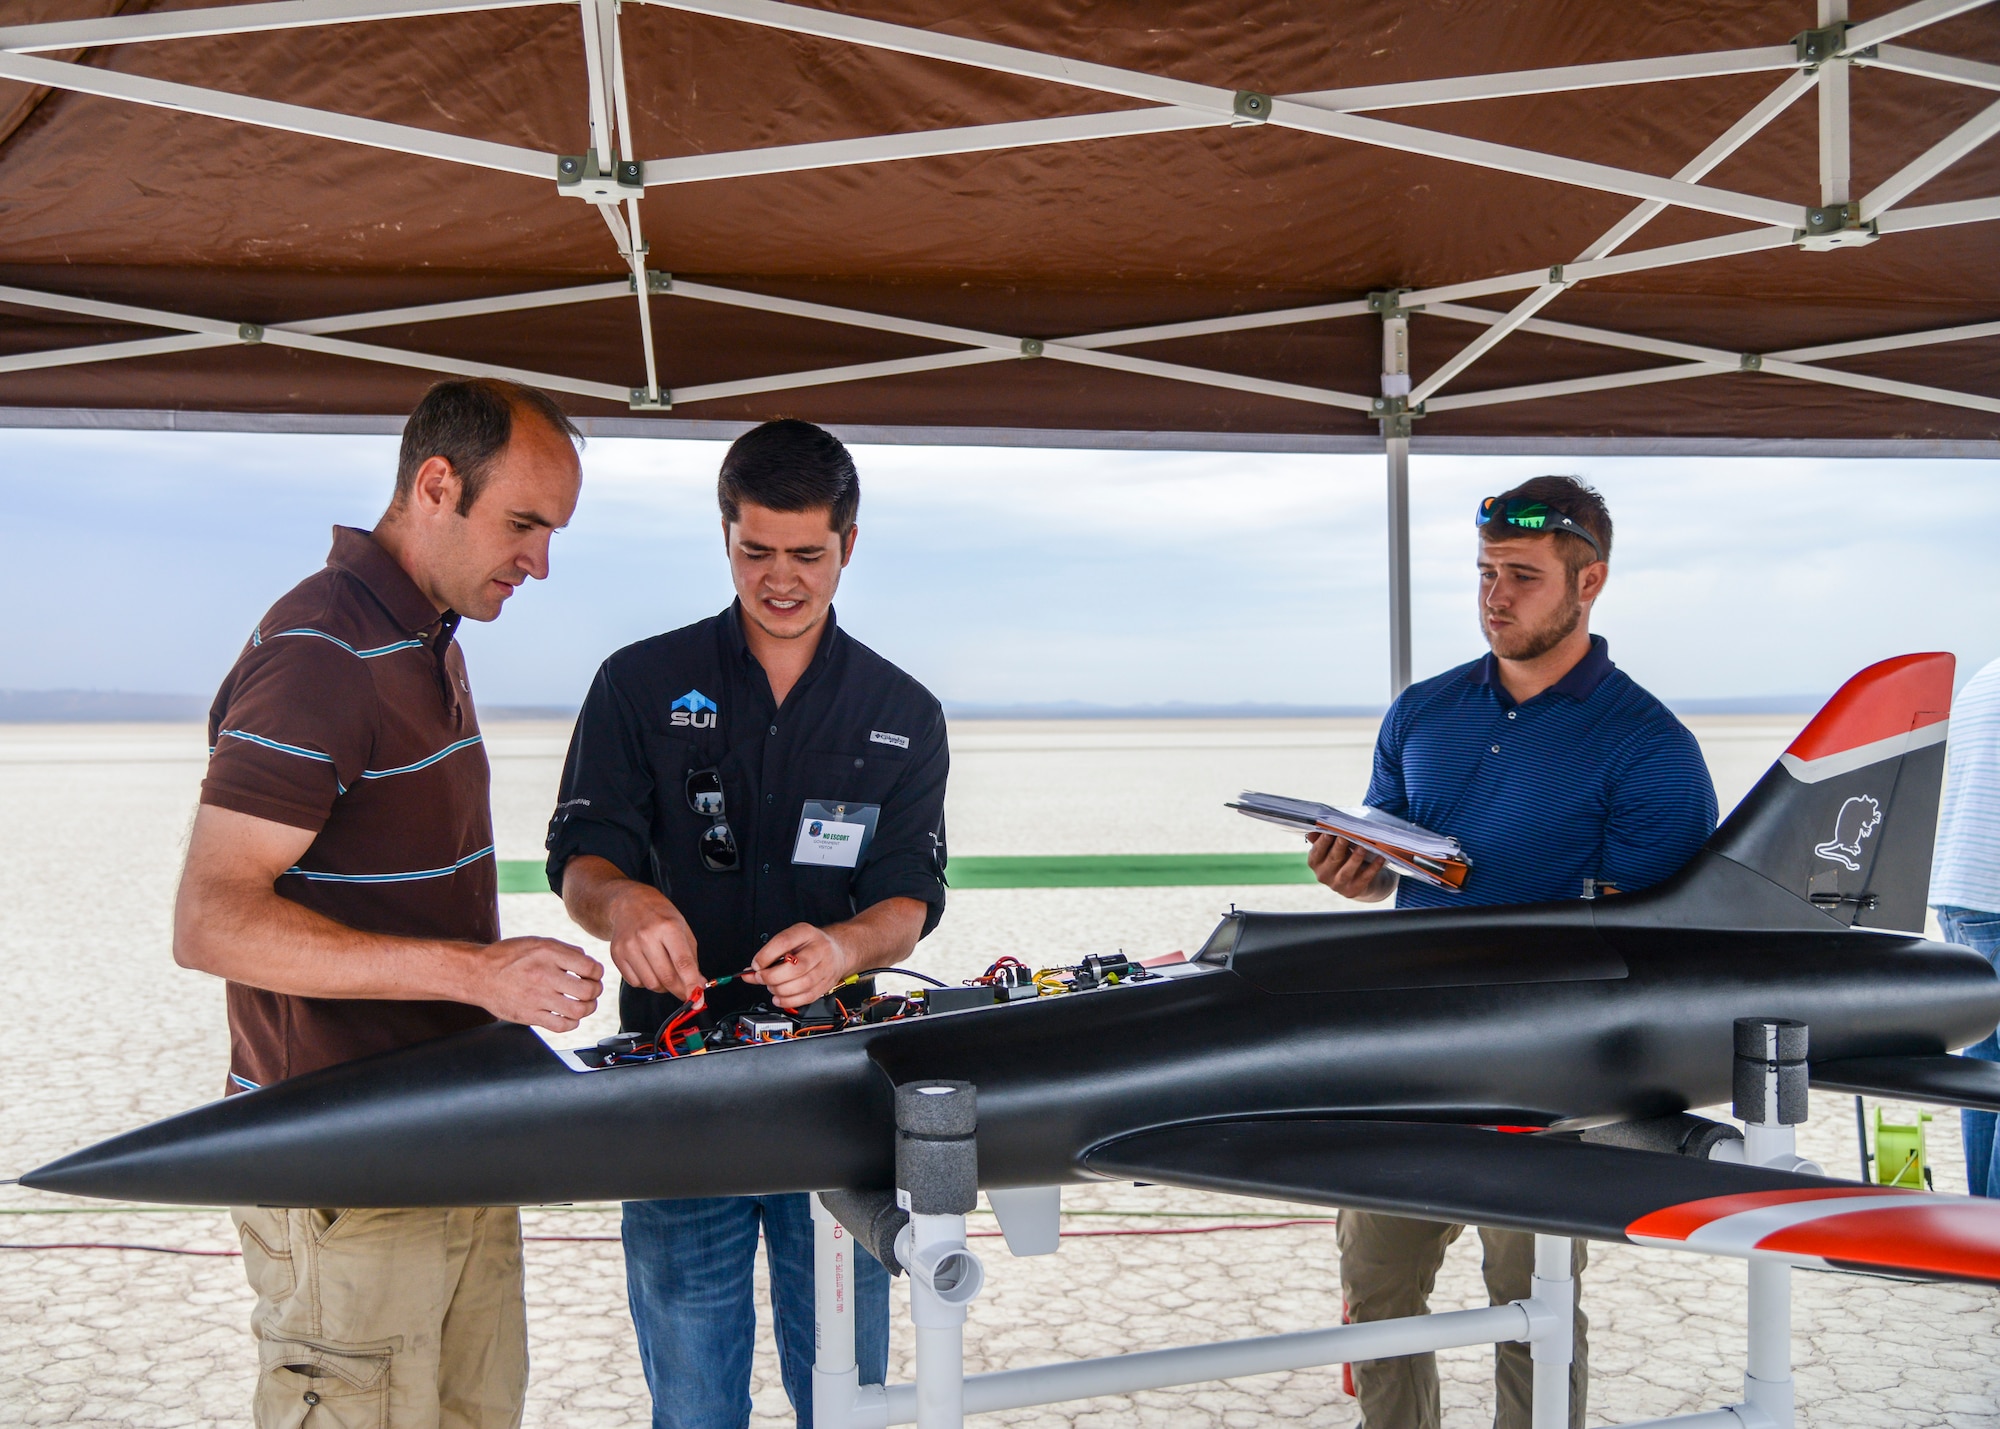 Engineers prepare an unmanned jet-powered aircraft for a flight test at Edwards Air Force Base, Calif., July 25. The flight tested a software suite called TACE, Testing Autonomy in a Complex Environment, developed by John Hopkins Applied Physics Lab. (U.S. Air Force photo by Giancarlo Casem)